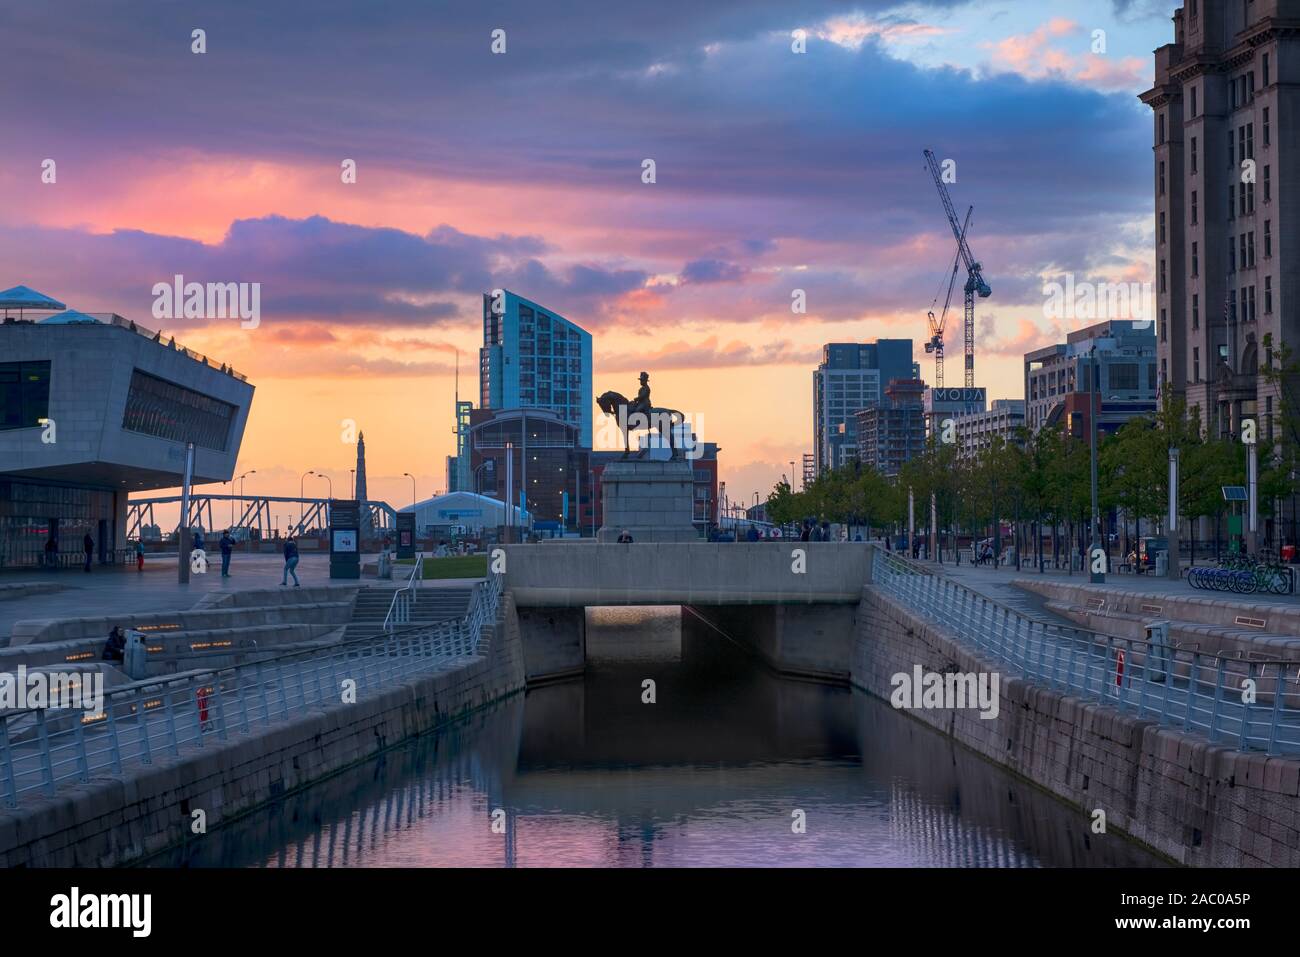 Liverpool Docks with Edward VII statue, Mersey Ferry Terminal and canal at sunset Stock Photo